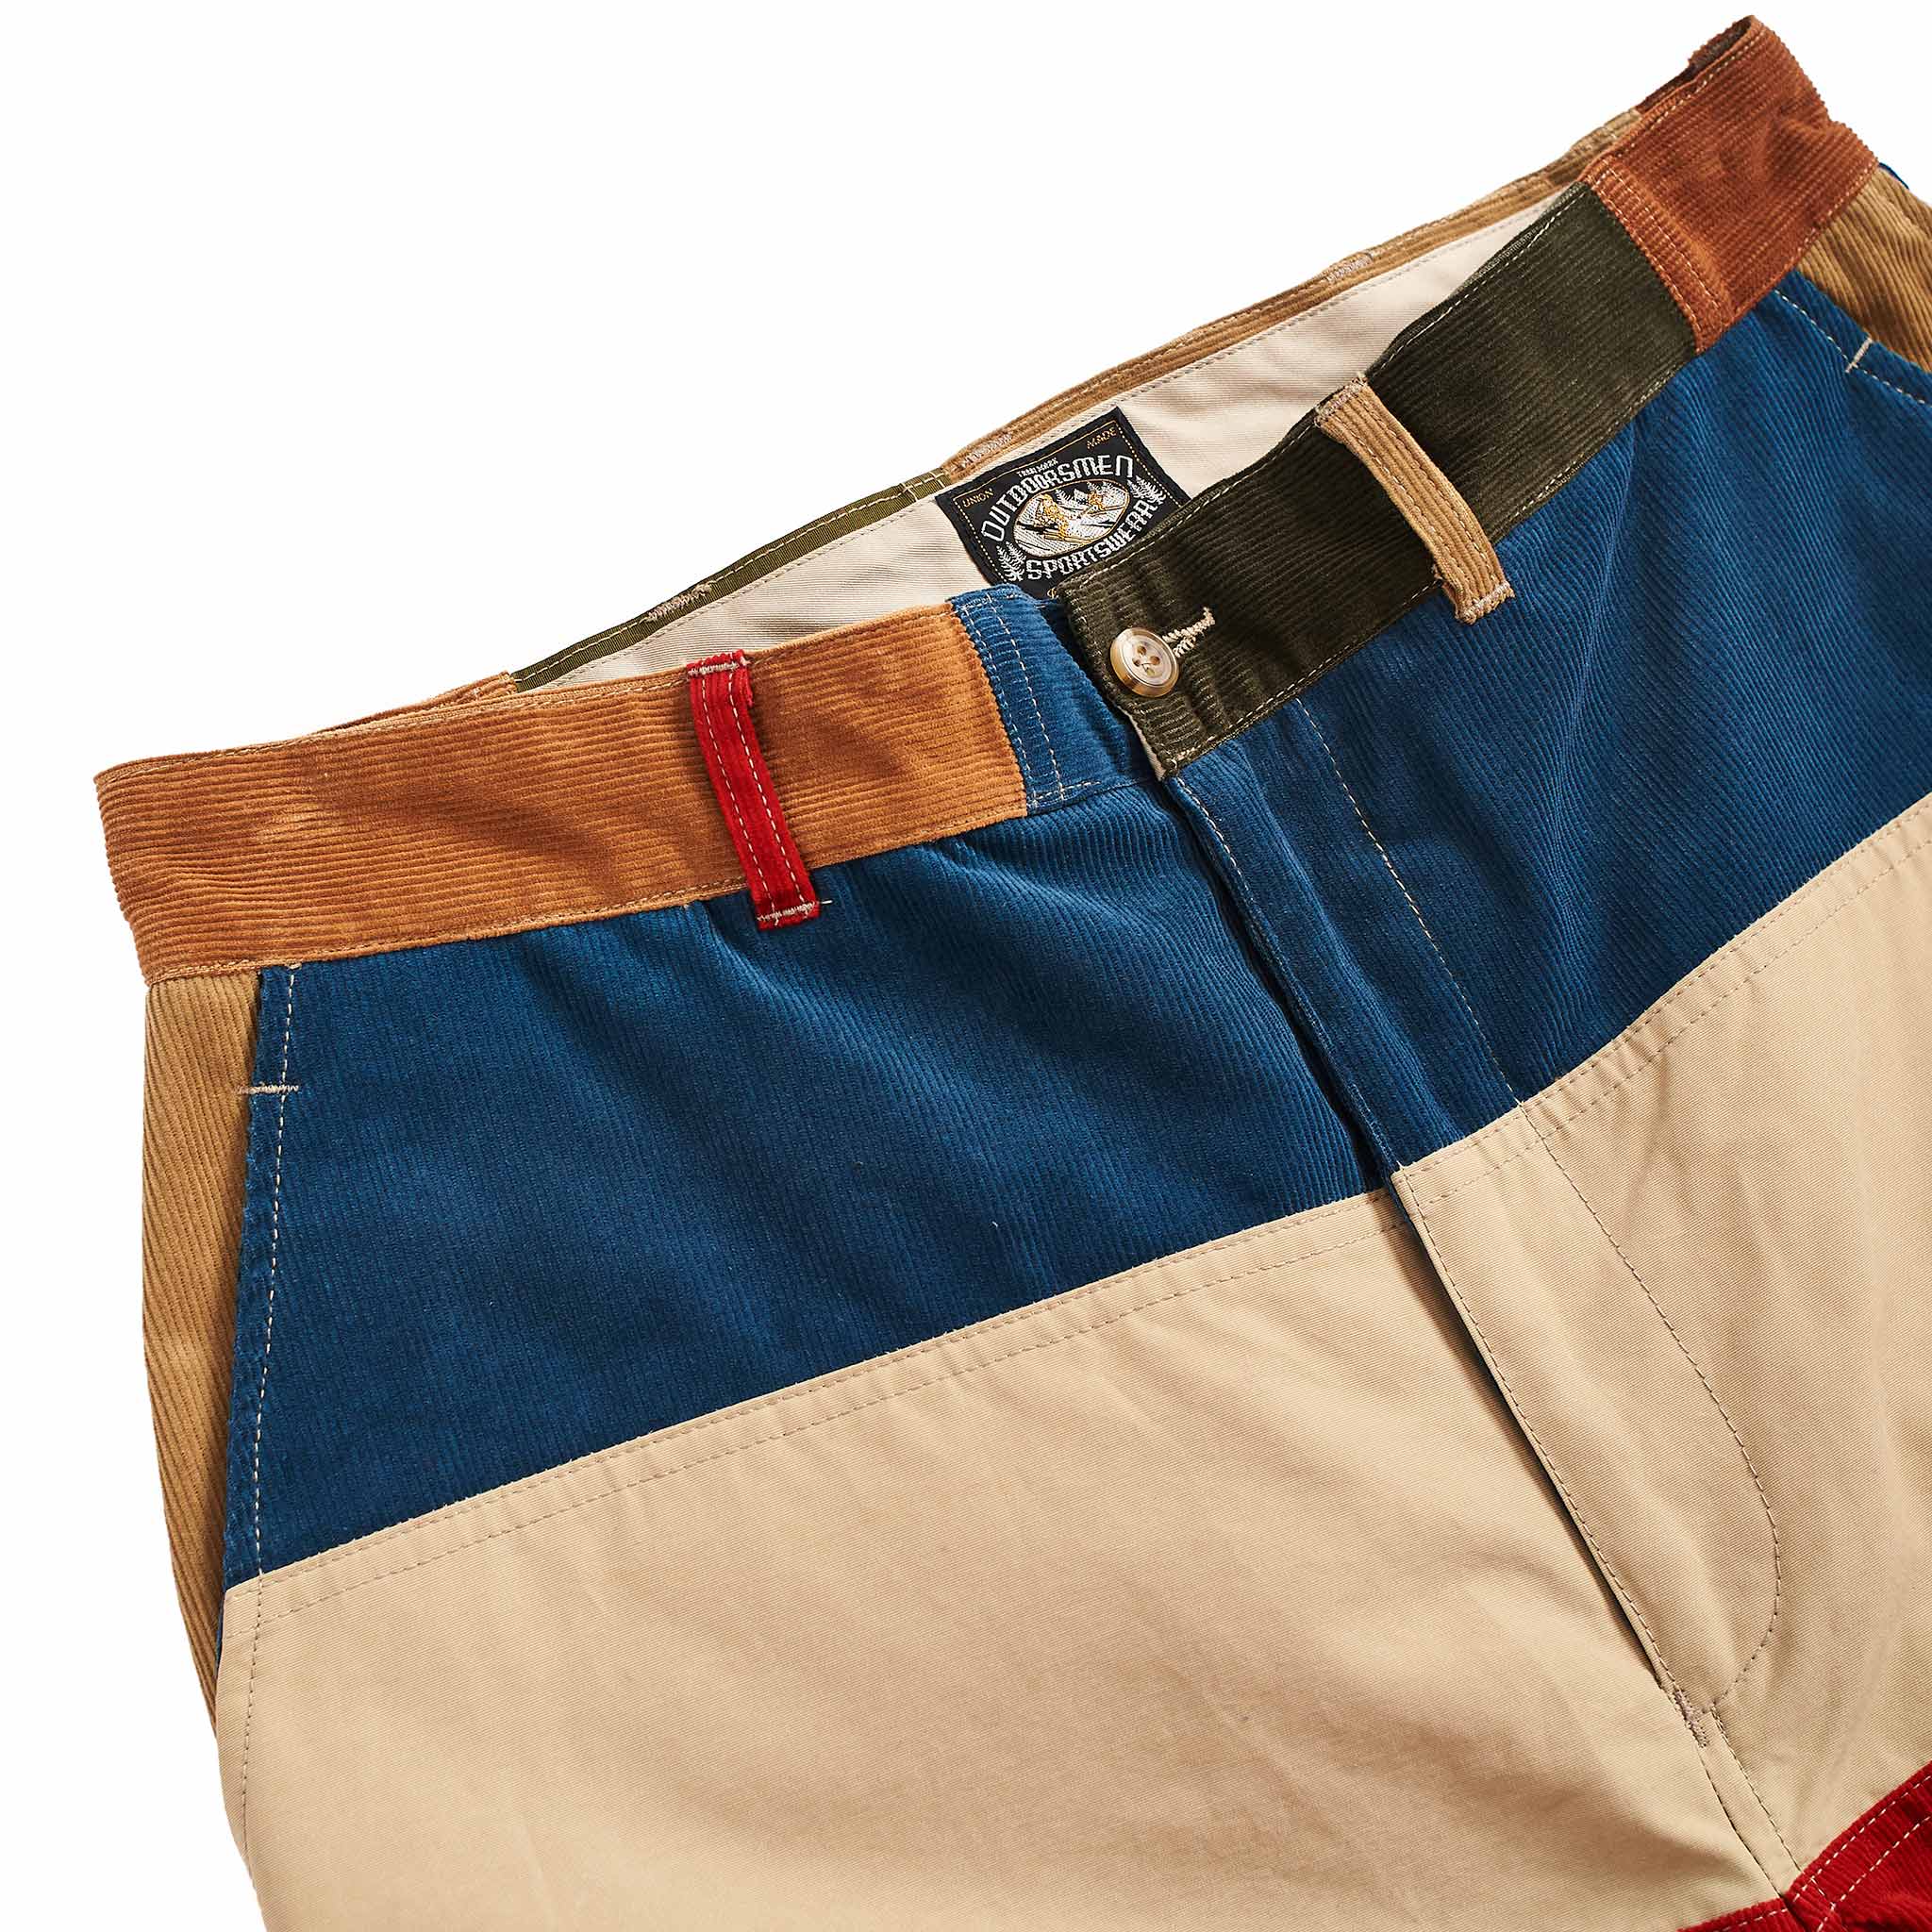 The Real McCoy's MP21011 Multicolour Corduroy Hunting Trousers Tricolour